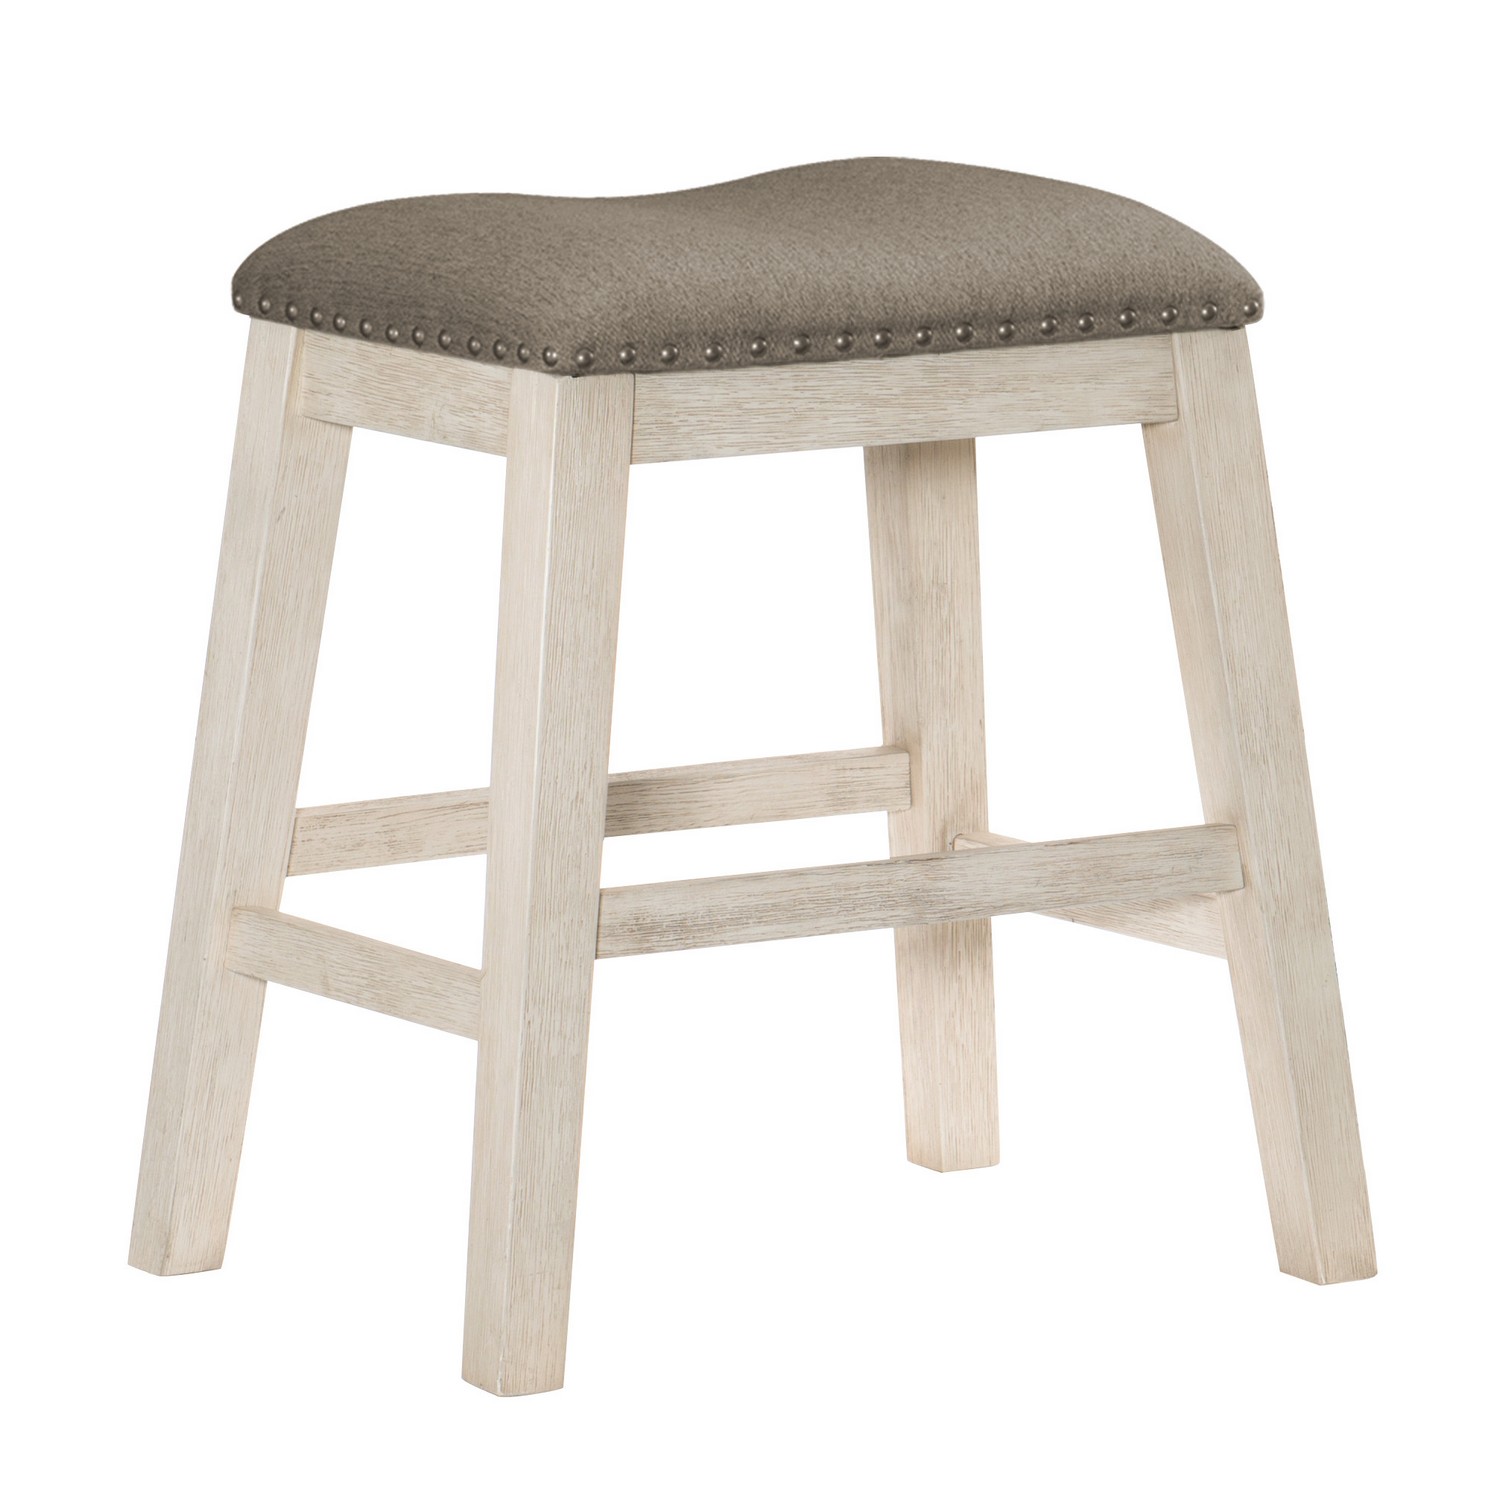 Homelegance Timbre Counter Height Stool - Antique White